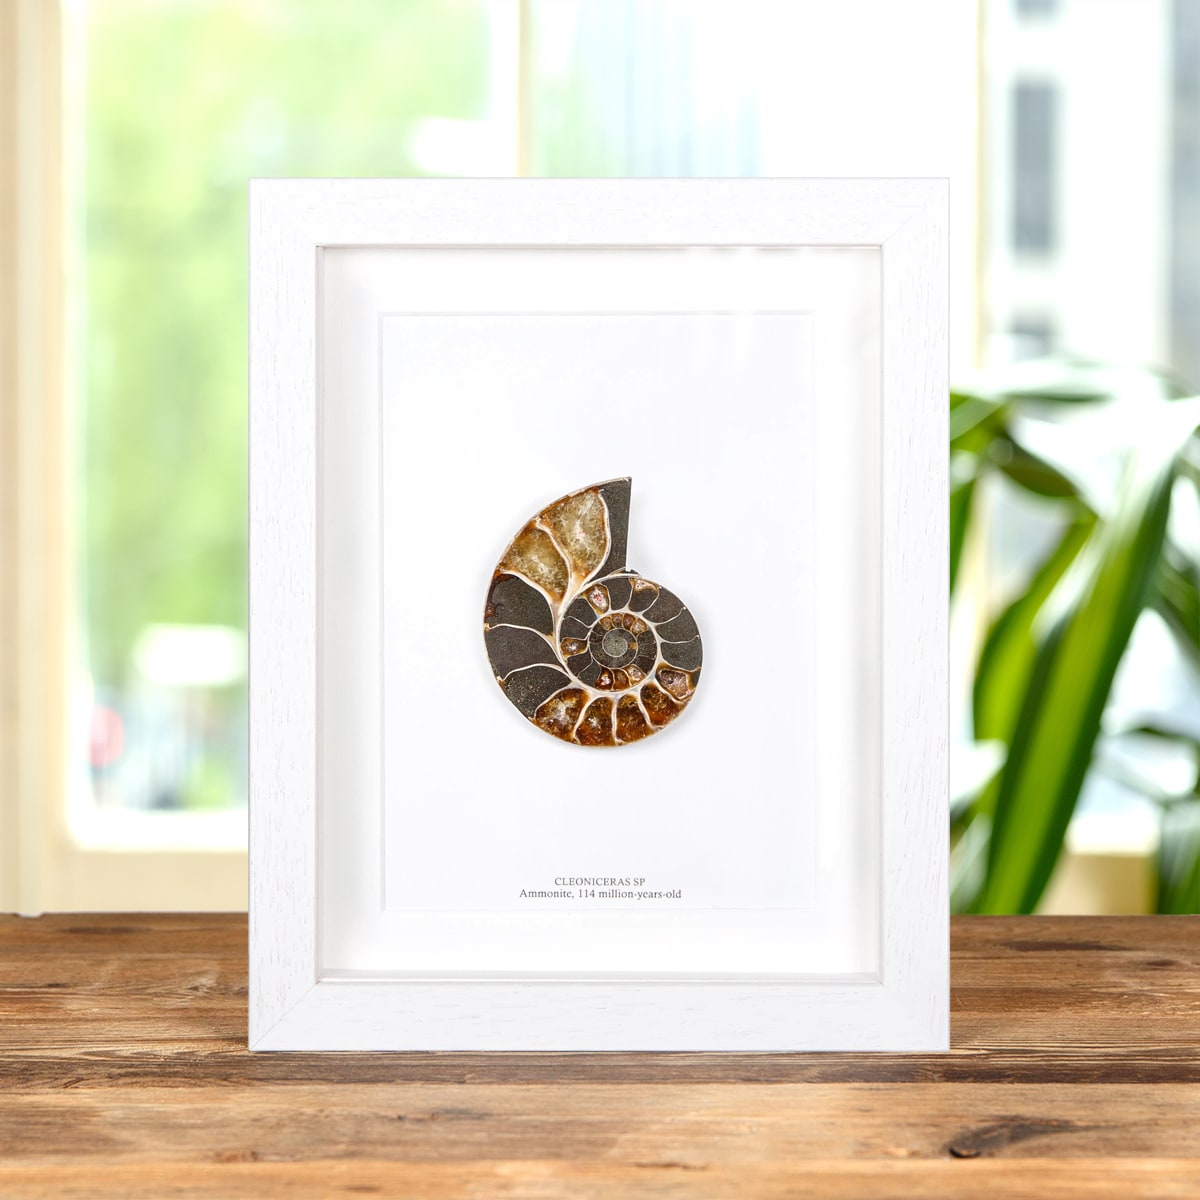 Ammonite Cut and Polished Fossil in Box Frame (Cleoniceras sp)